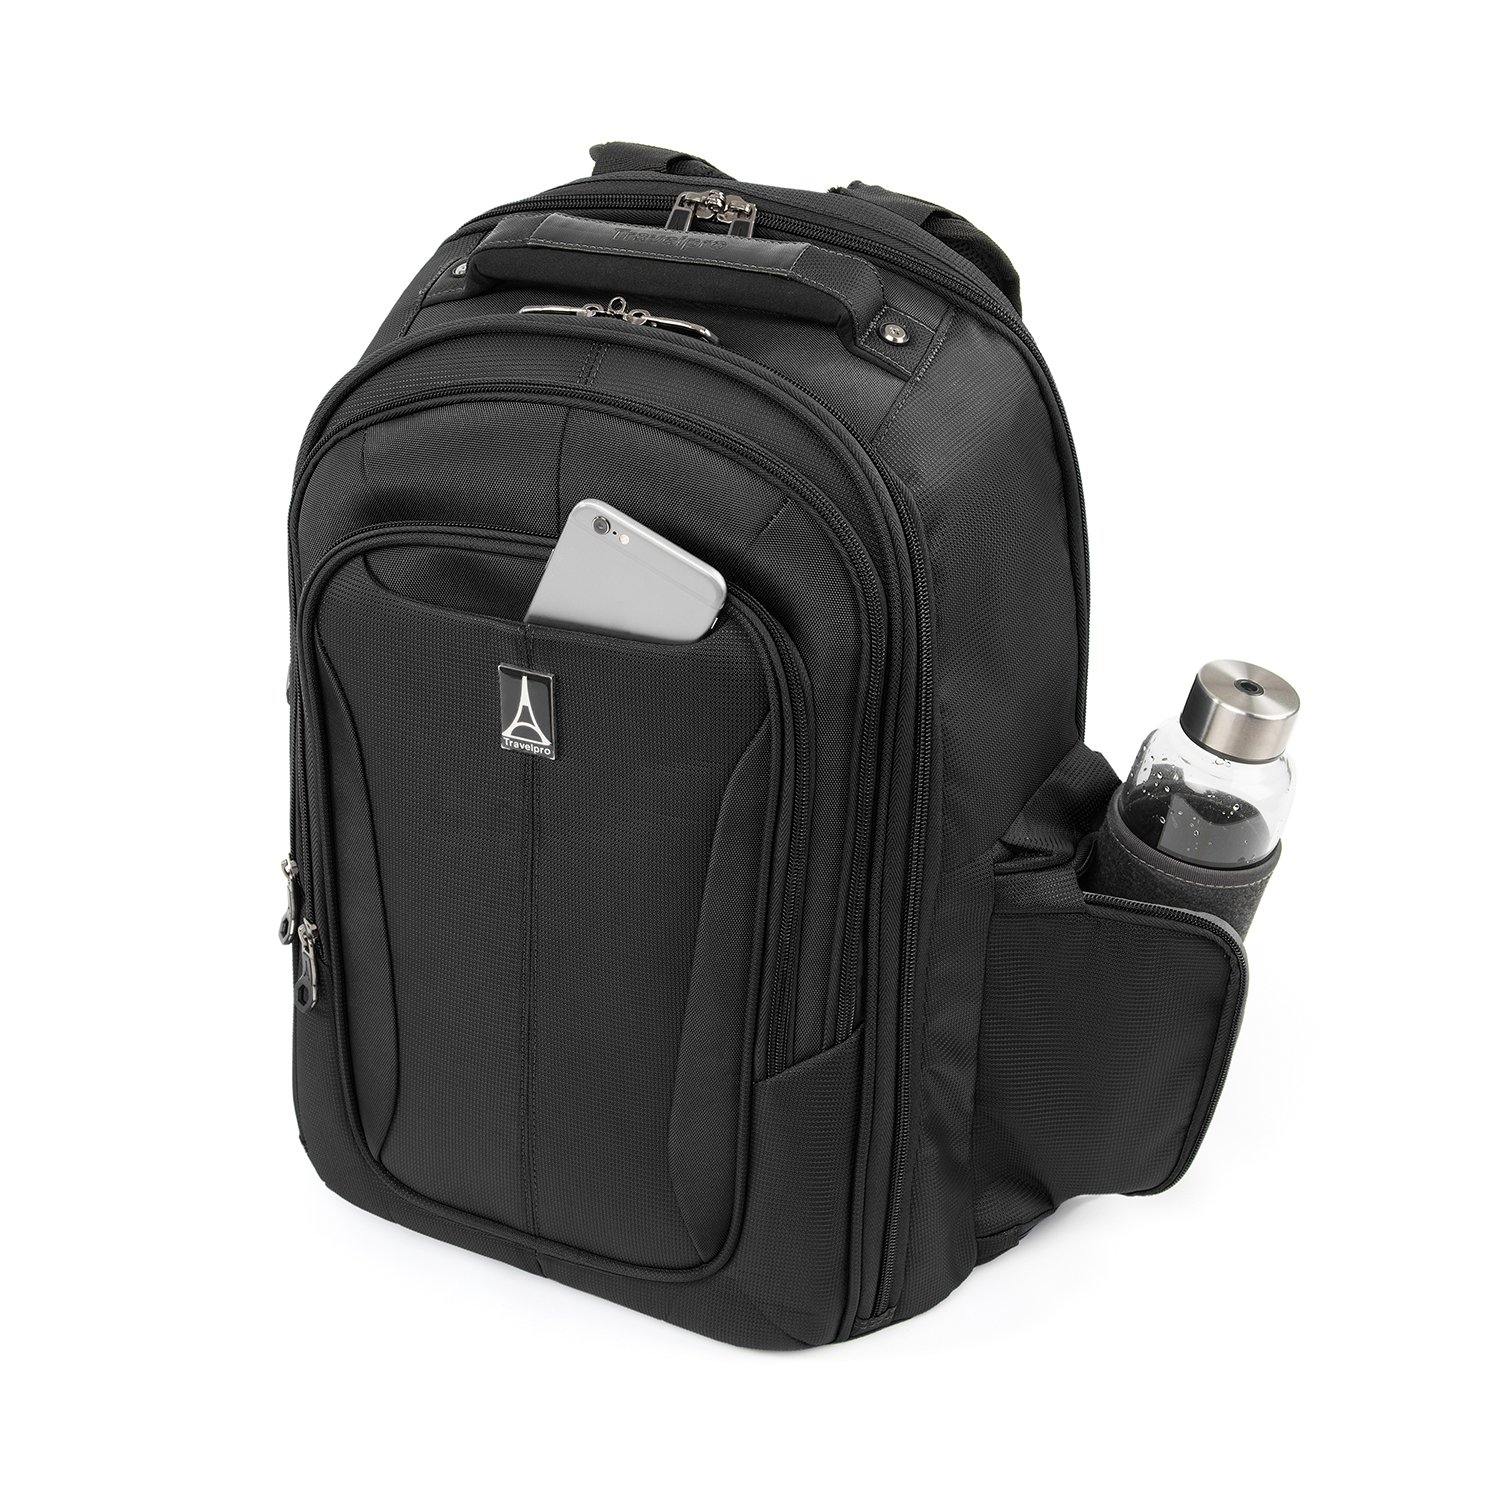 Protective Laptop Bags for Commutes & Business Travel | Travelpro